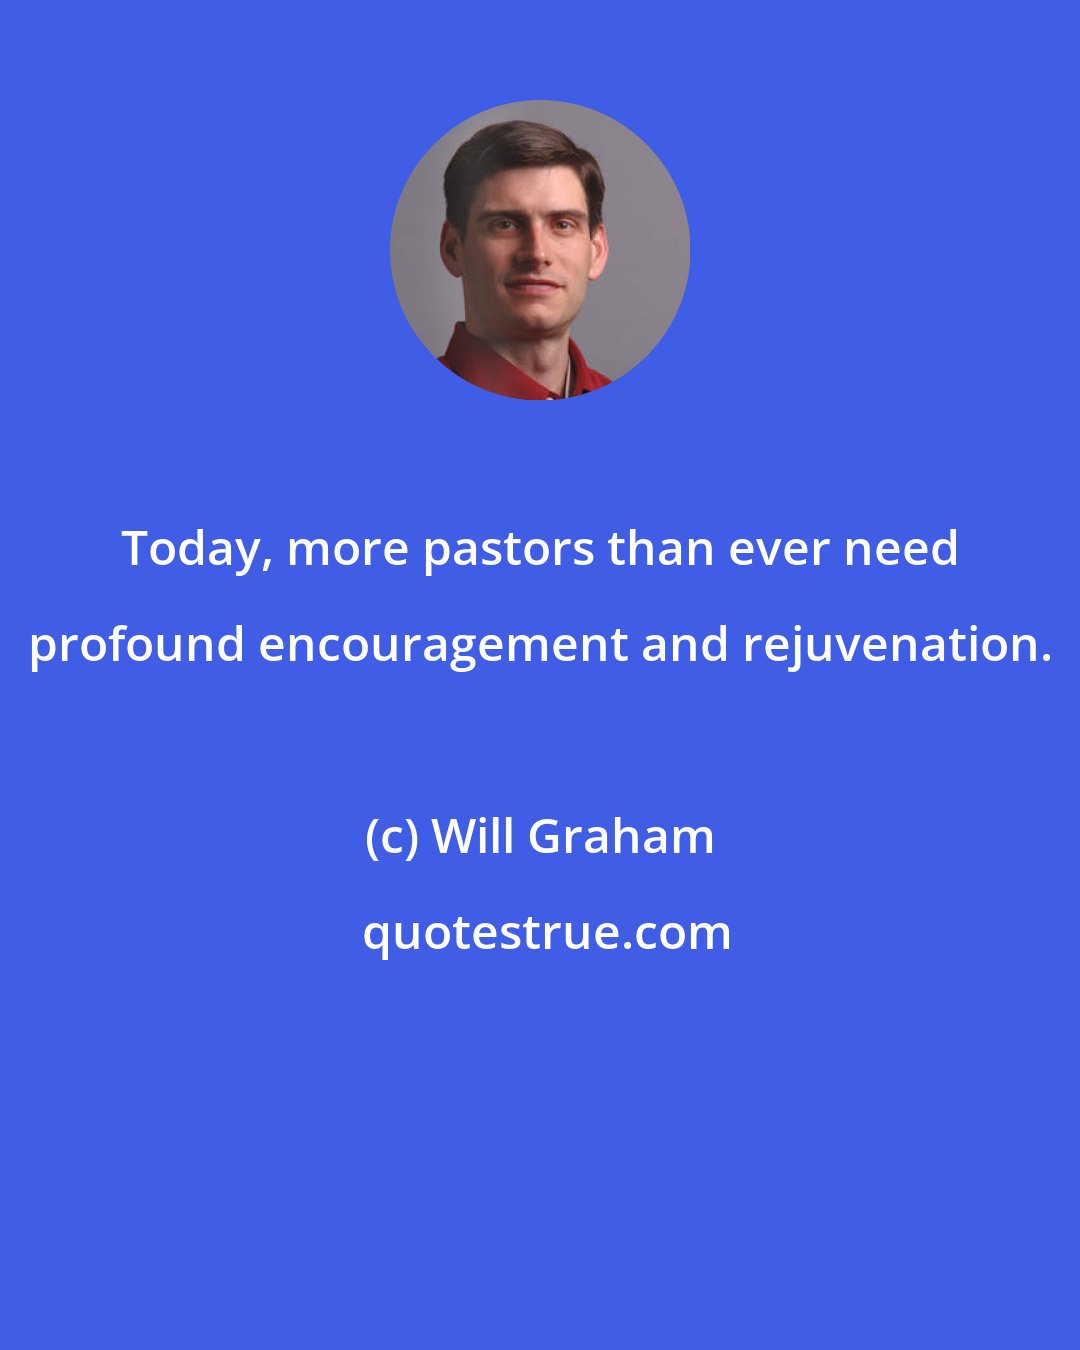 Will Graham: Today, more pastors than ever need profound encouragement and rejuvenation.